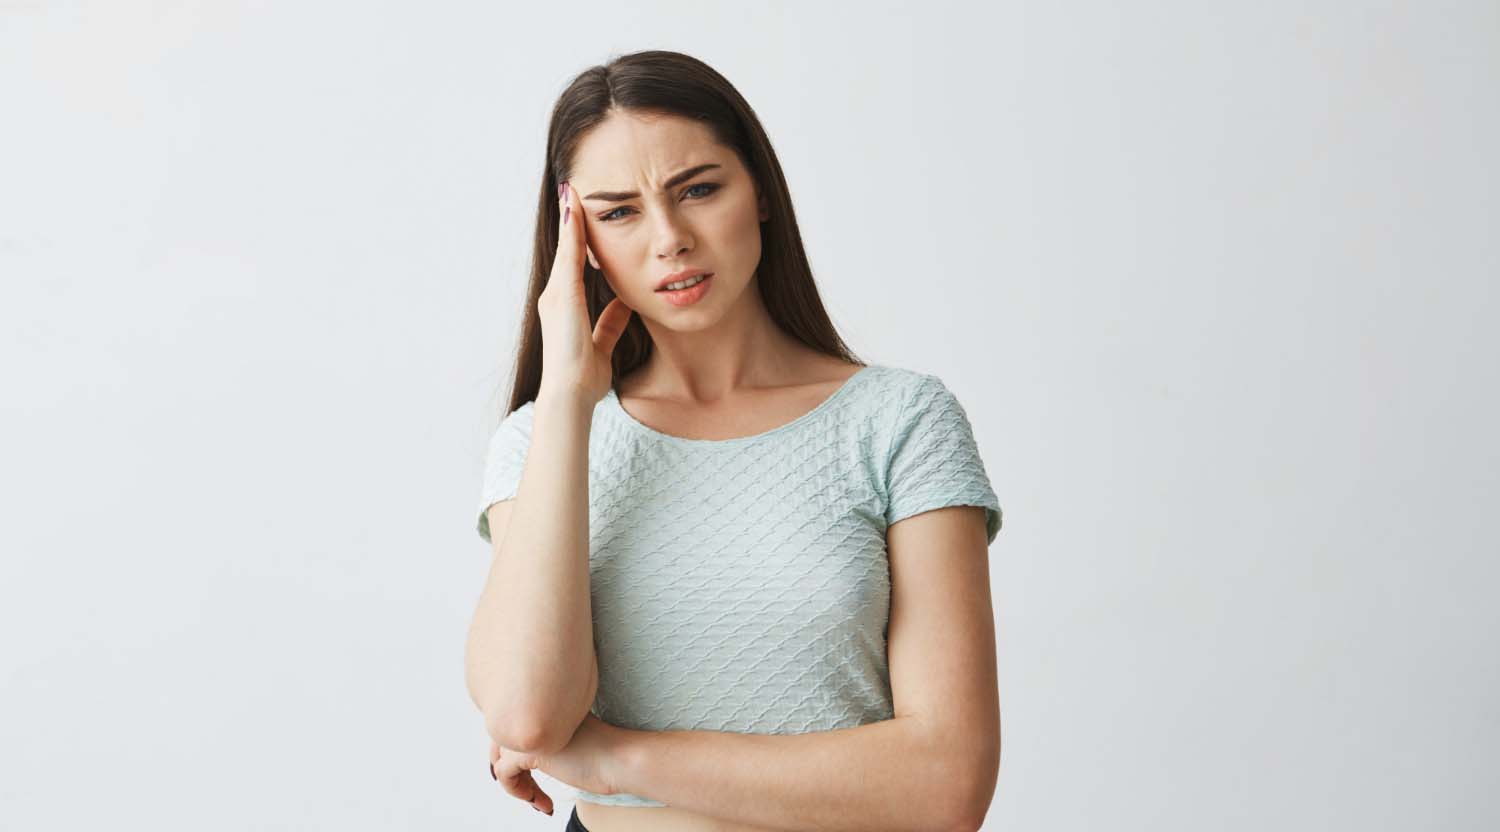 Headaches - Causes and Relief